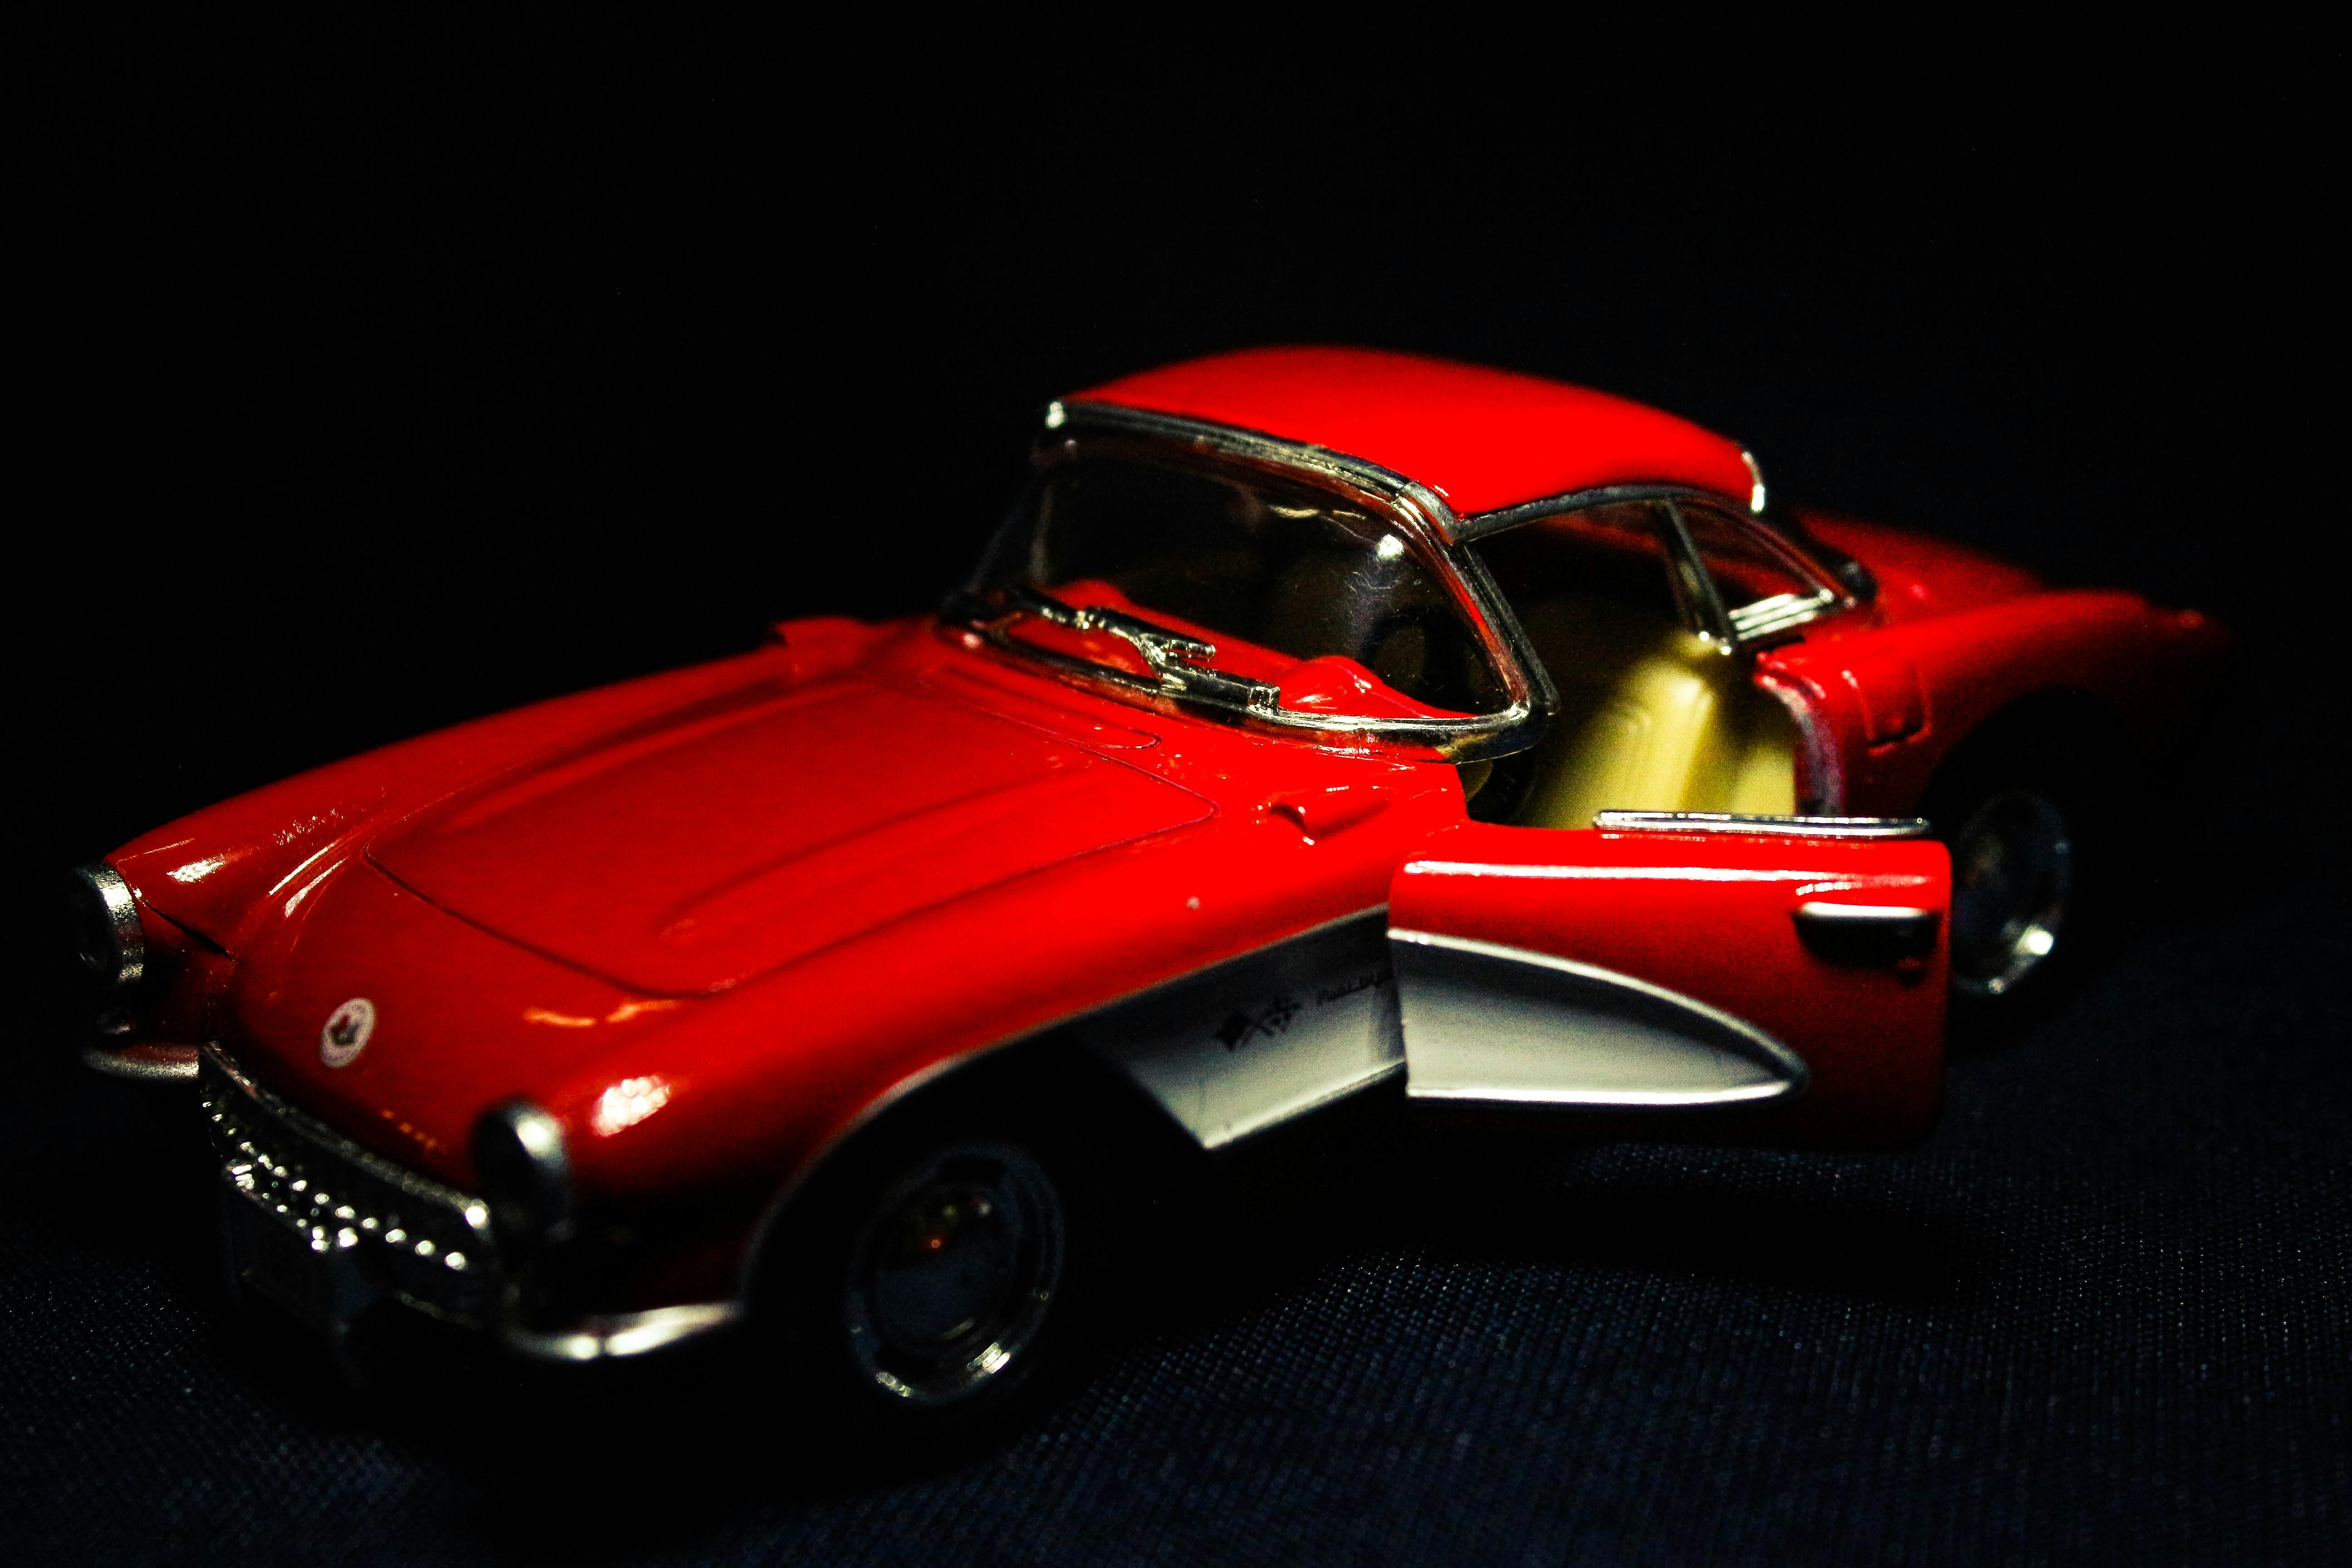 Free stock photo of car, miniature toy, toy cars